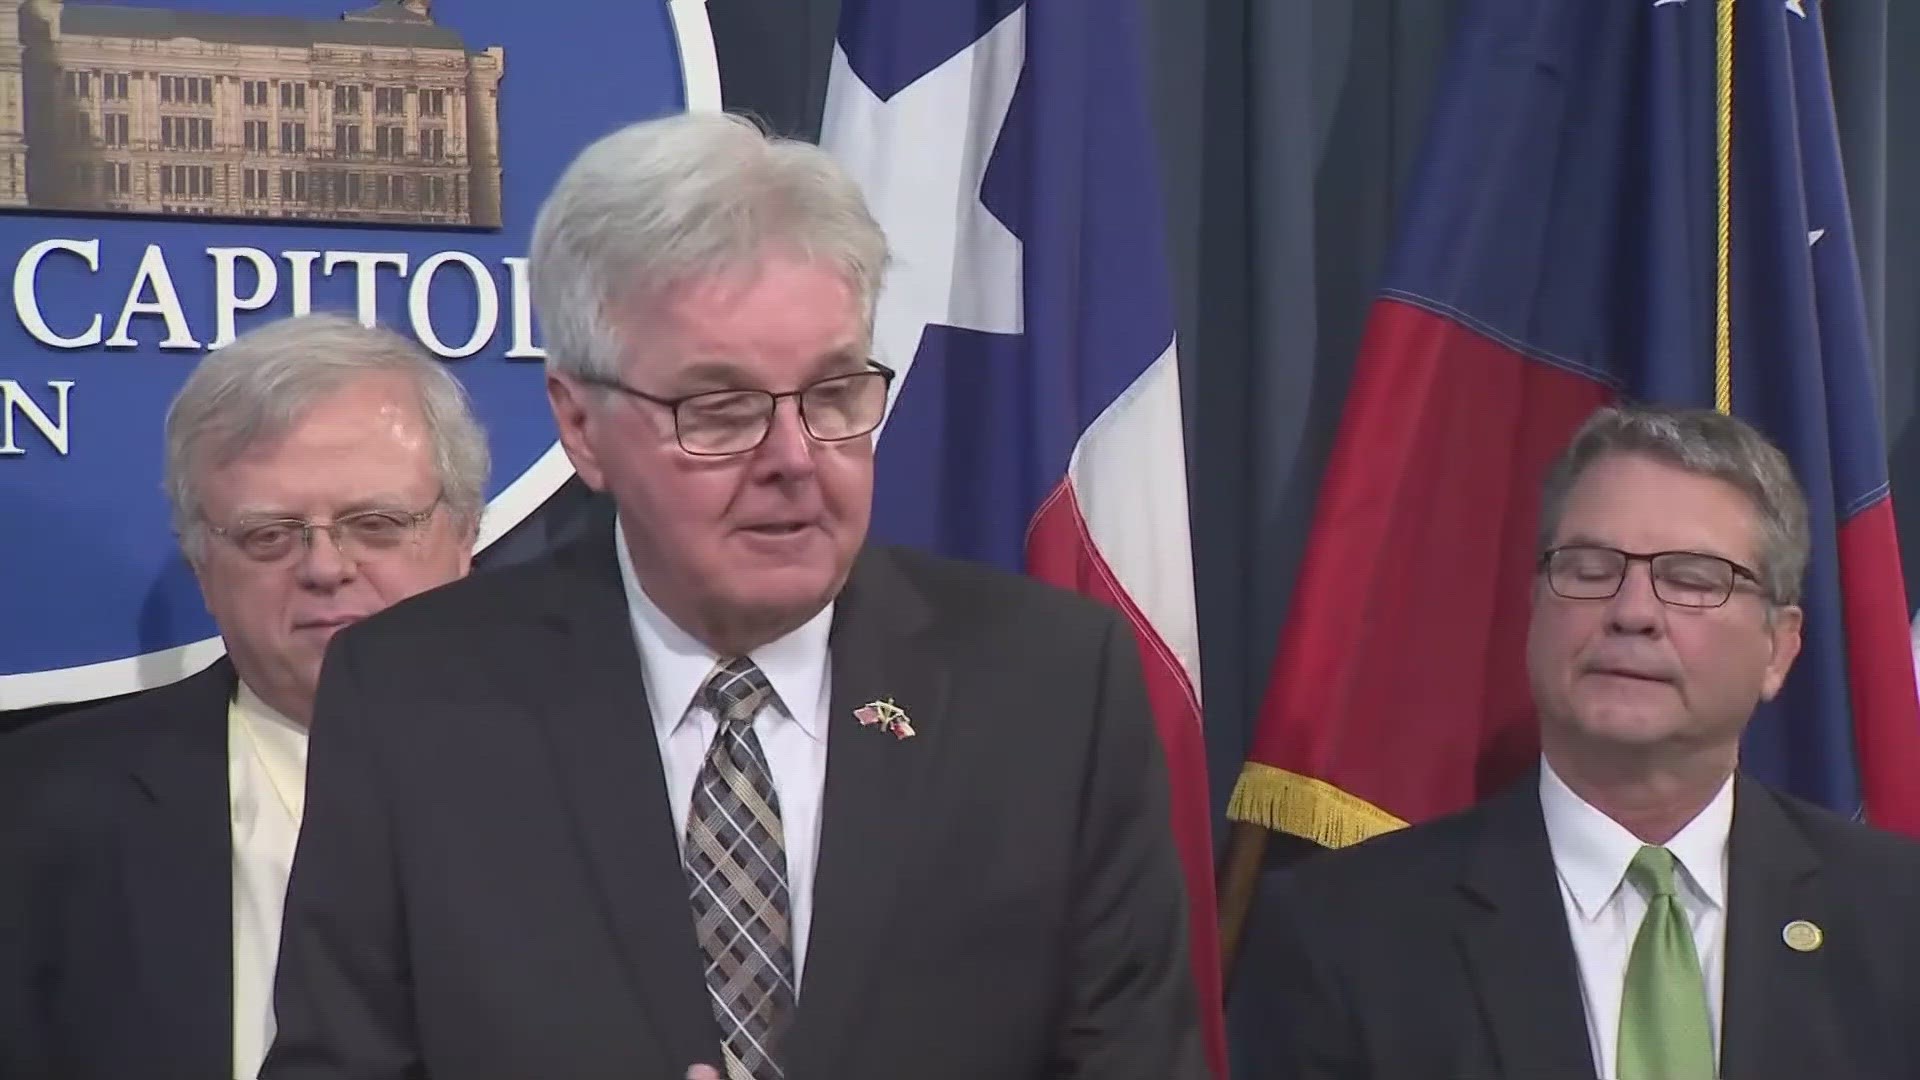 Lt. Governor Dan Patrick proposed using nearly half of the state’s surplus to increase homestead exemptions for all Texans. San Antonians could save hundreds.